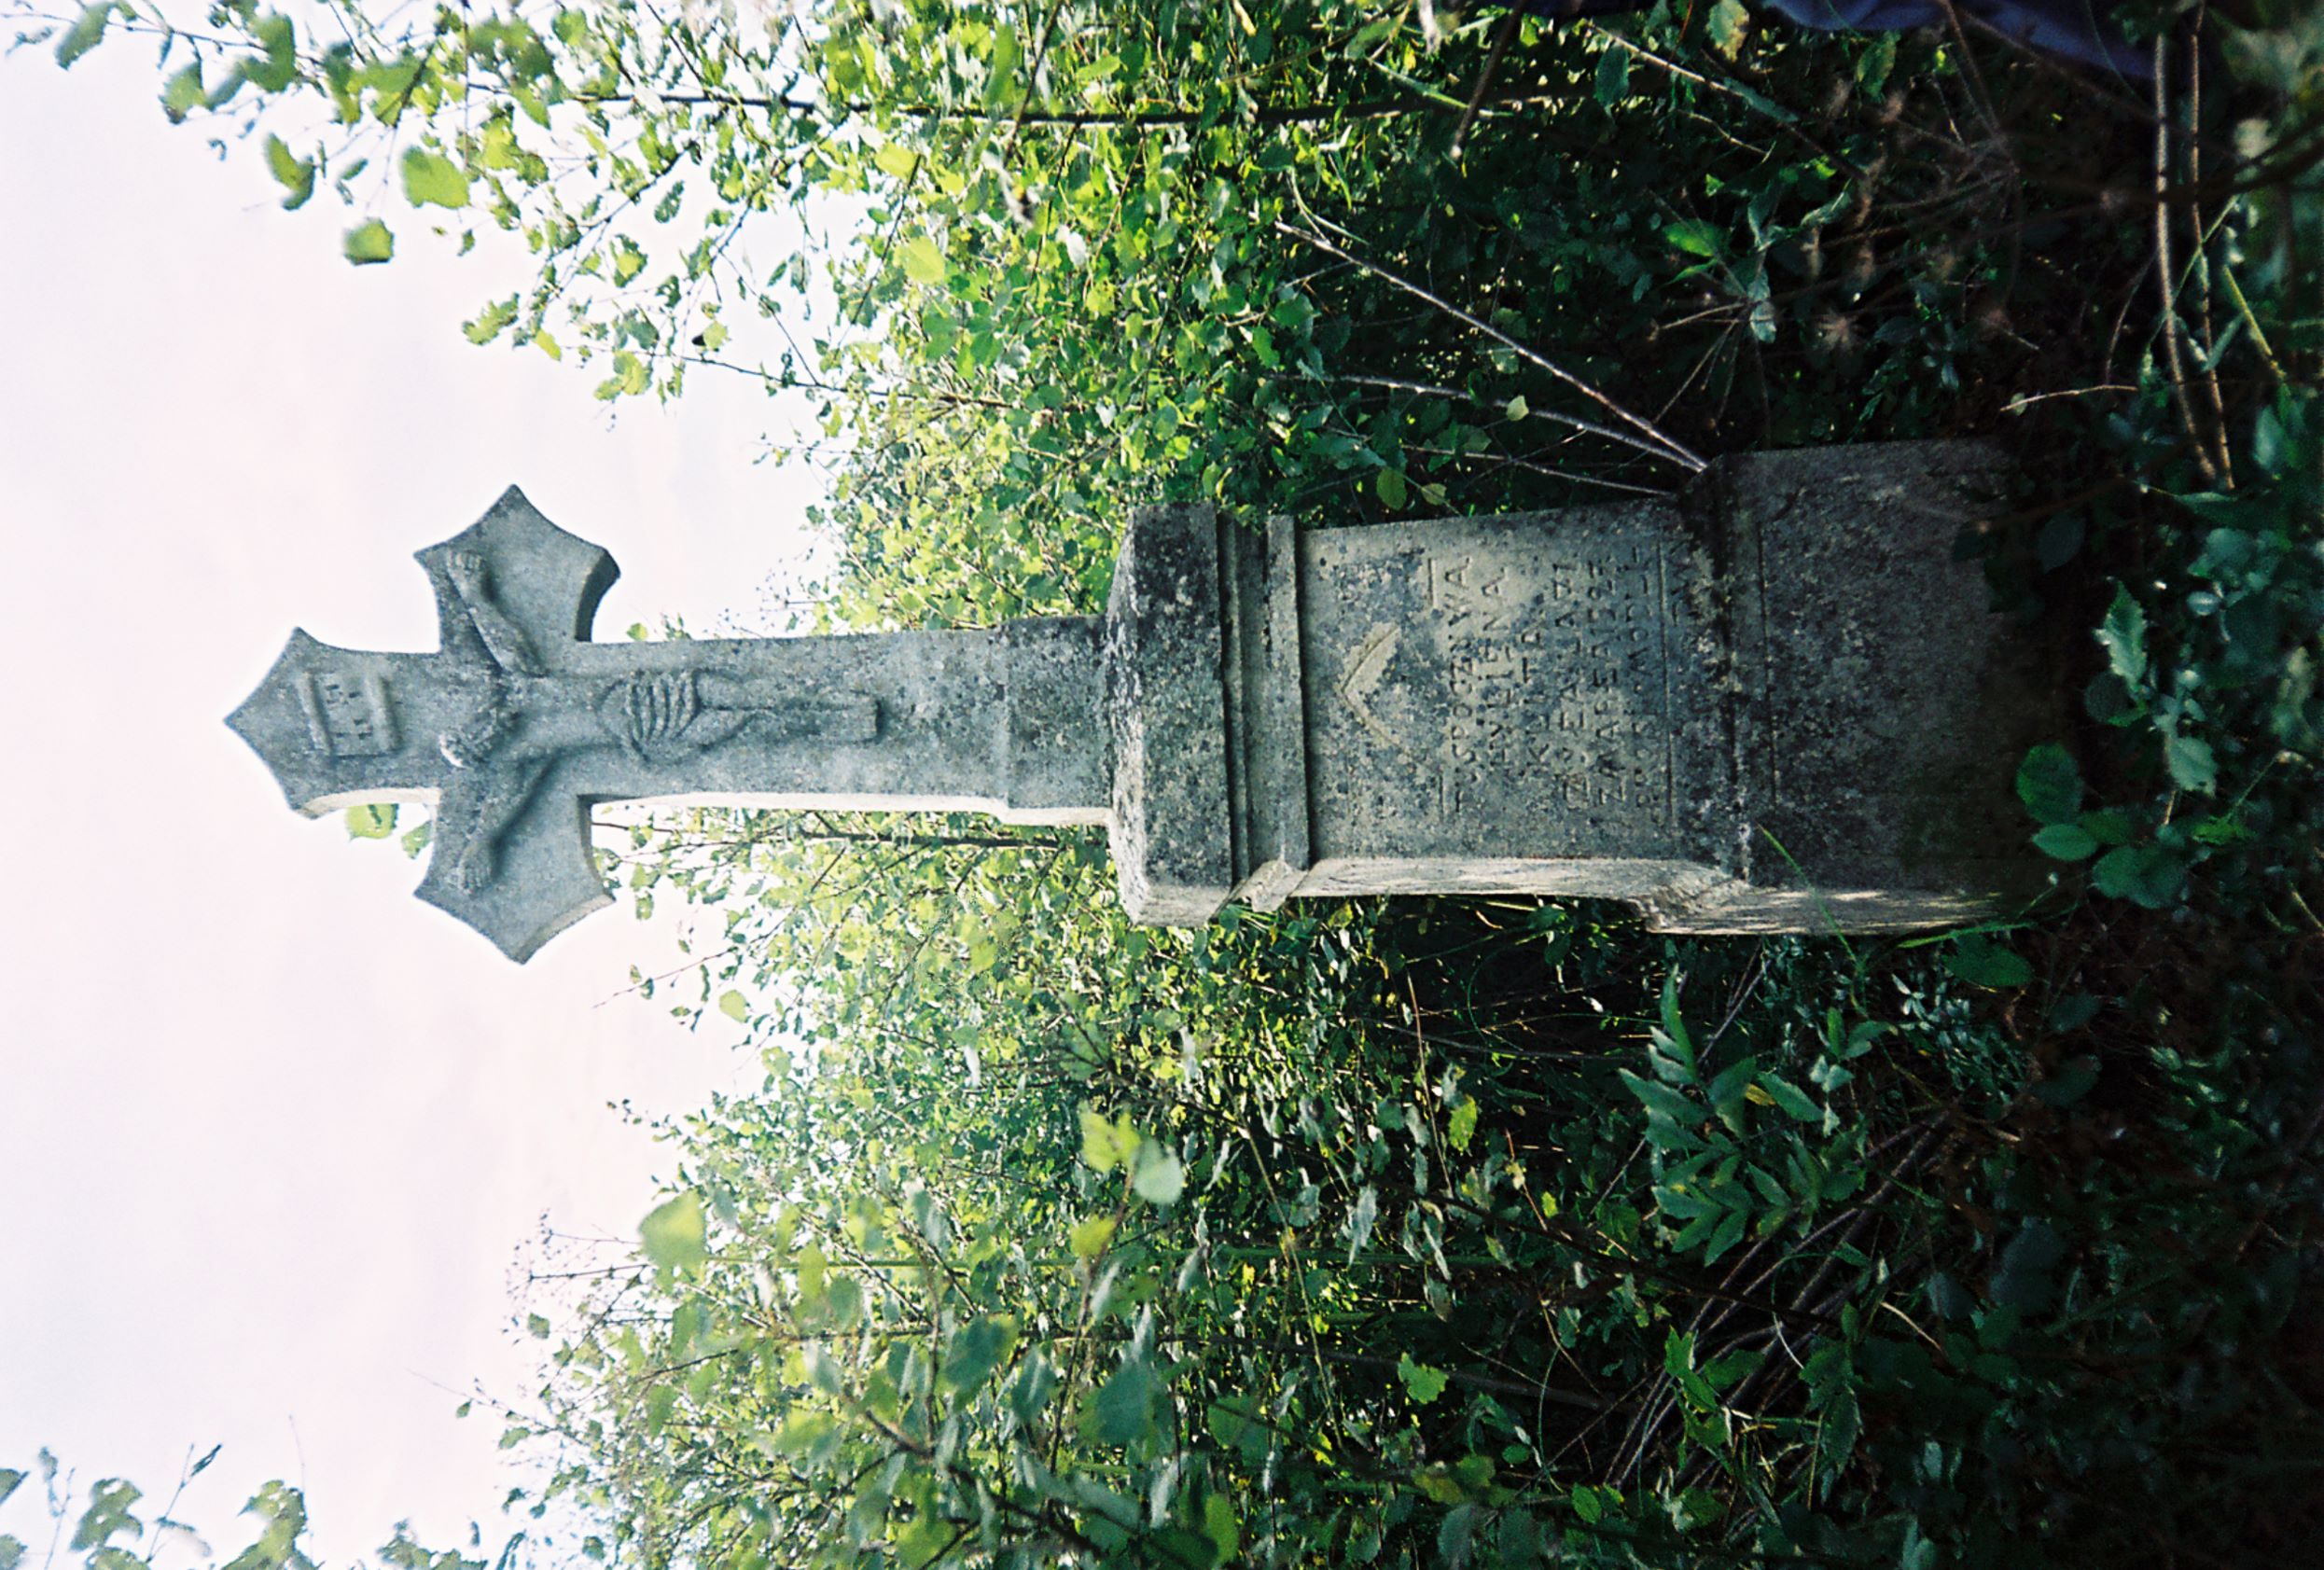 Tombstone of Helena Klita, Pyszkowice cemetery, as of 2006.